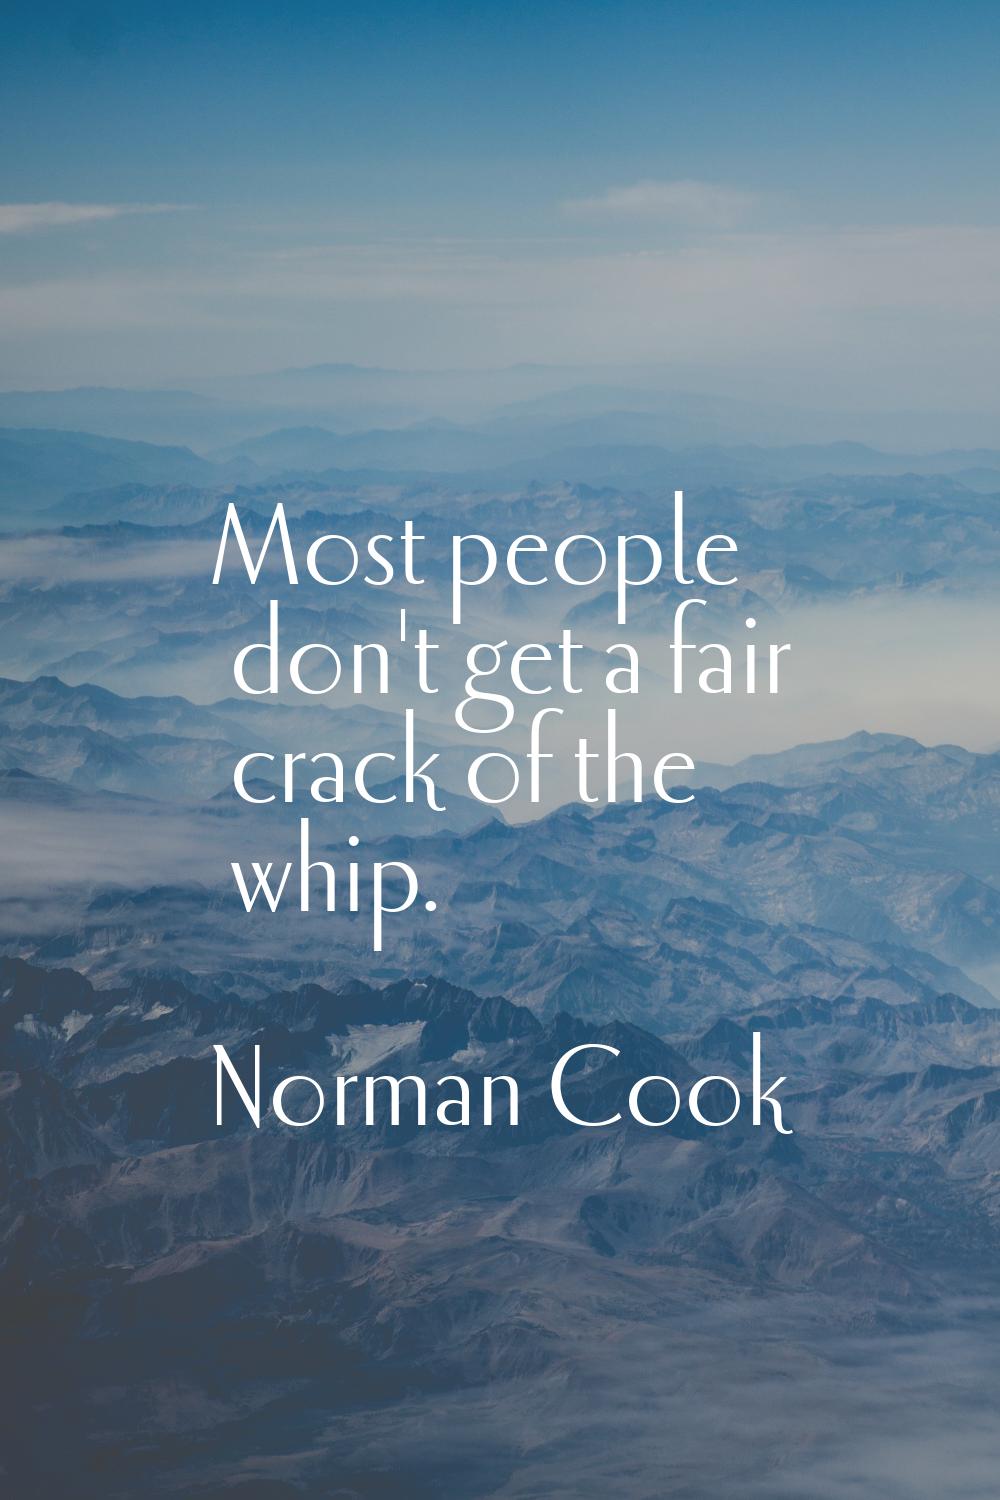 Most people don't get a fair crack of the whip.